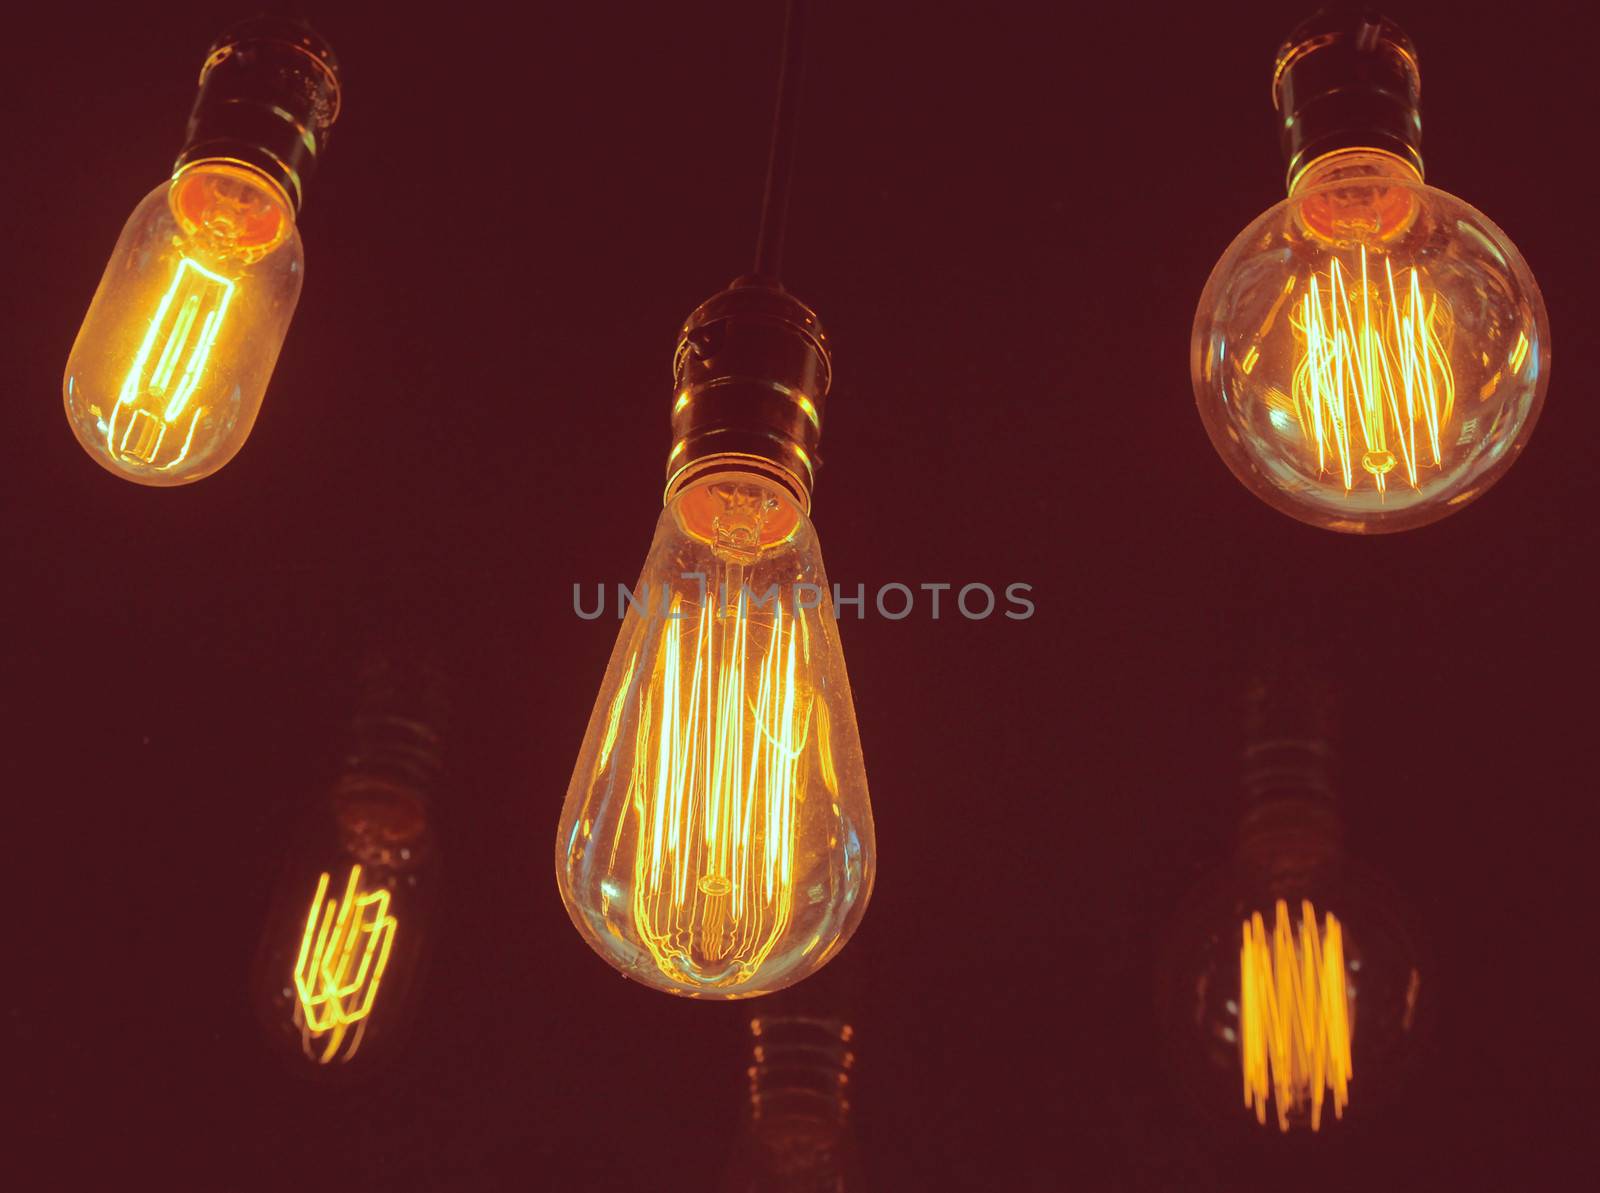 Vintage lighting decor with retro filter effect by nuchylee